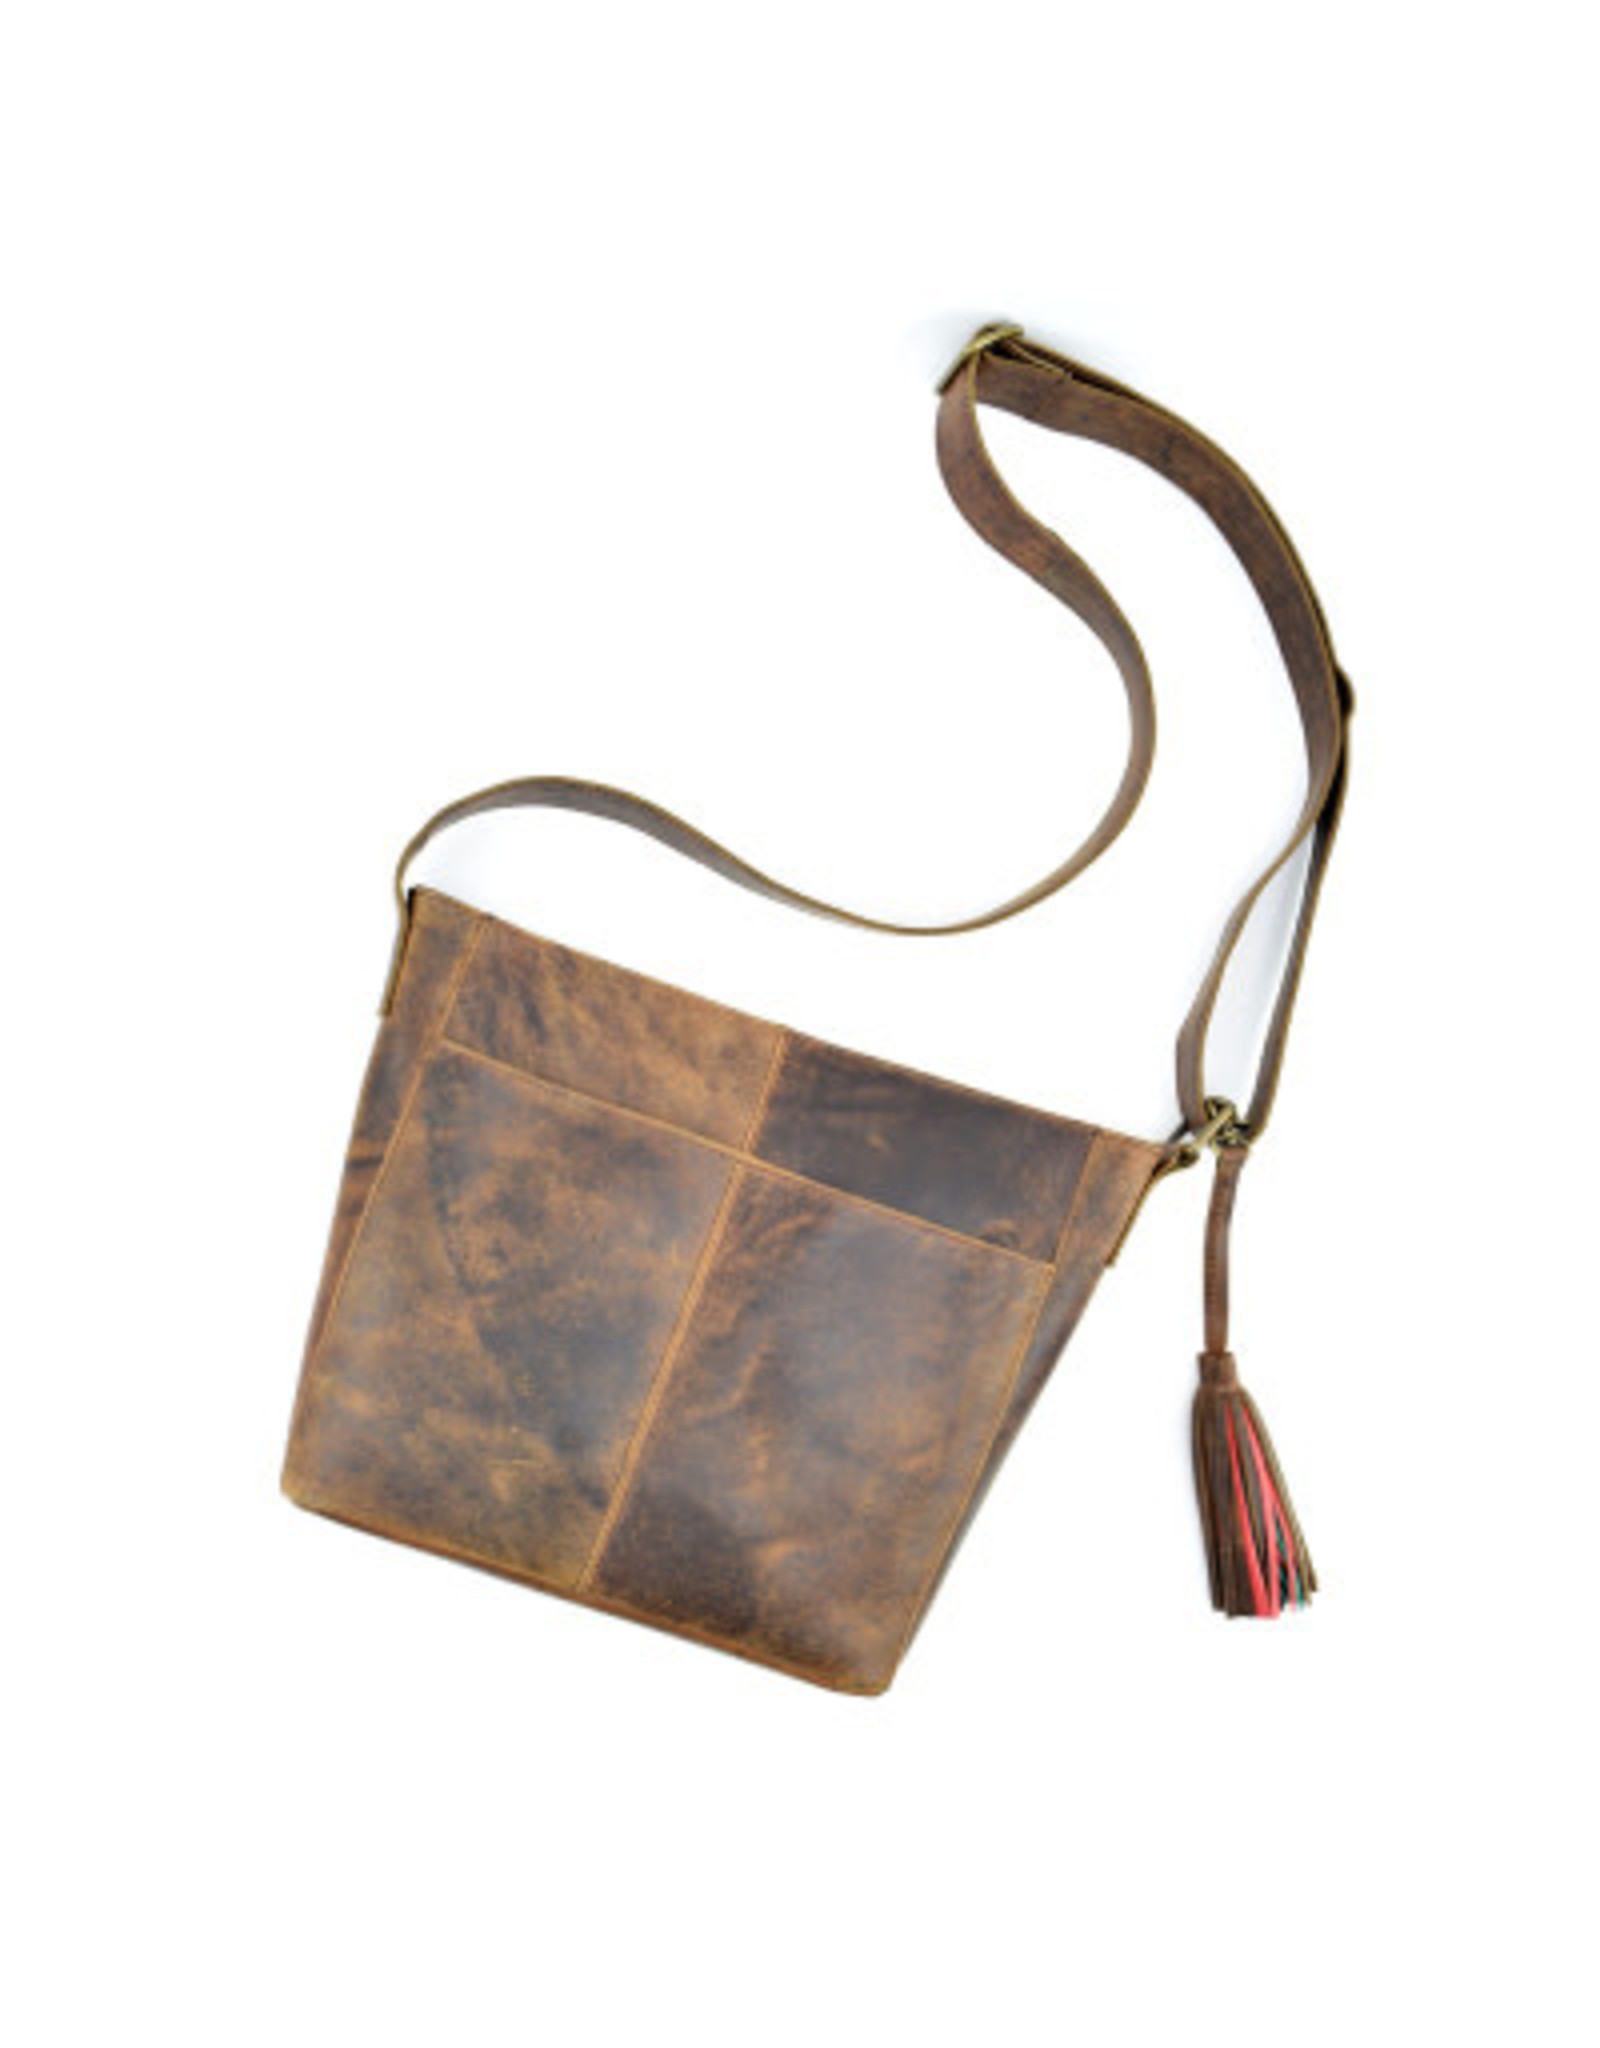 Trade roots Rustic Leather Crossbody Bag, India